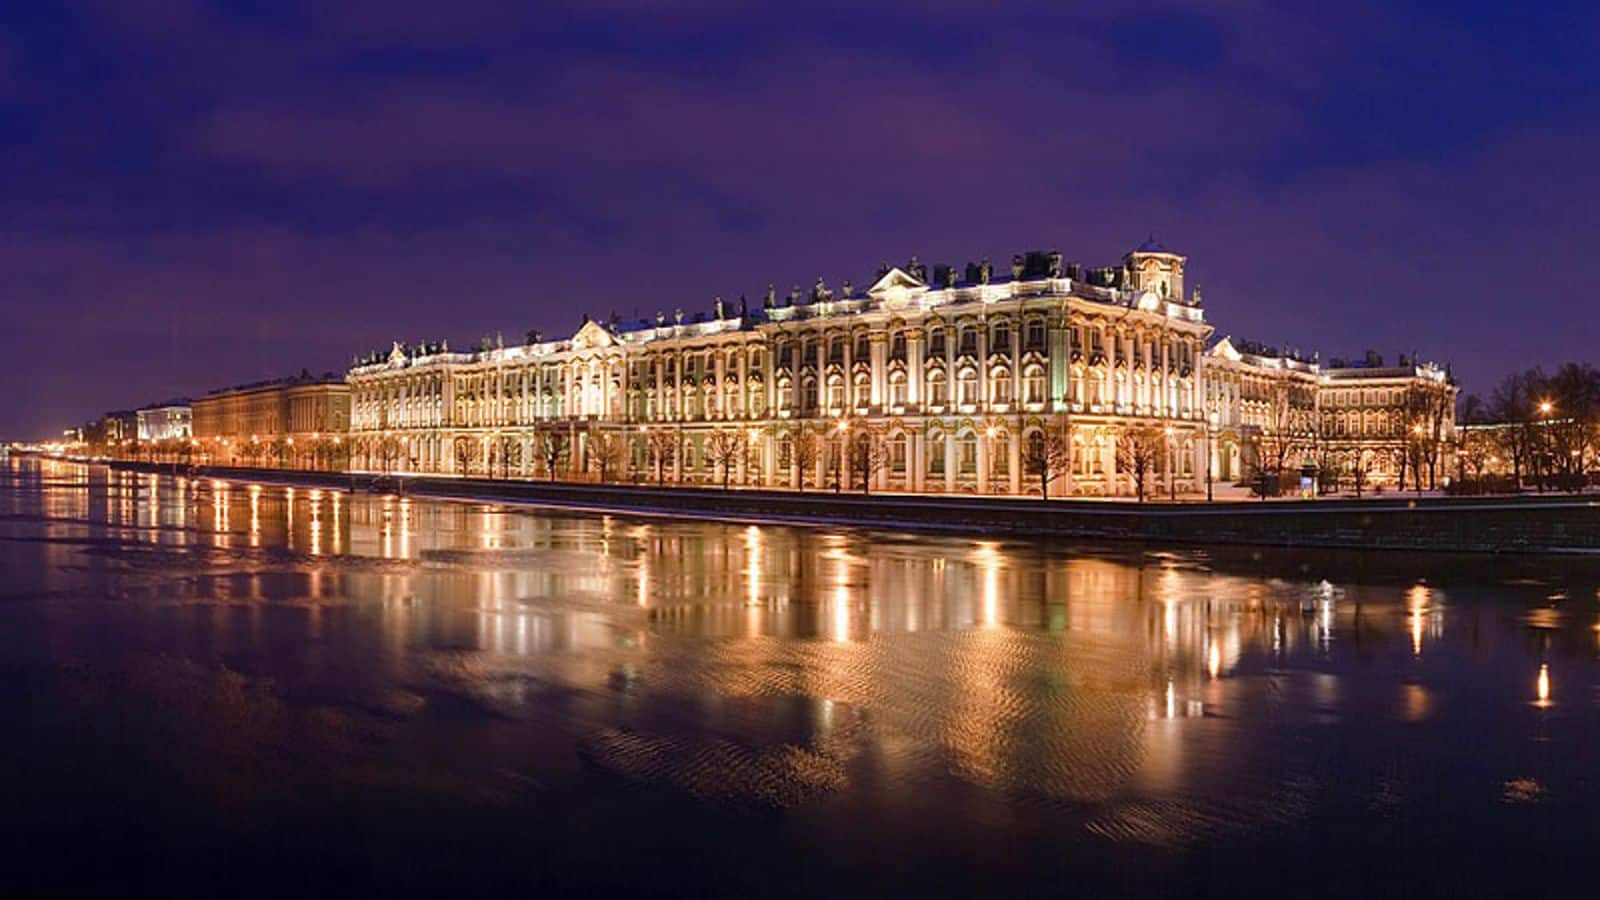 A journey through architectural wonders in St. Petersburg, Russia